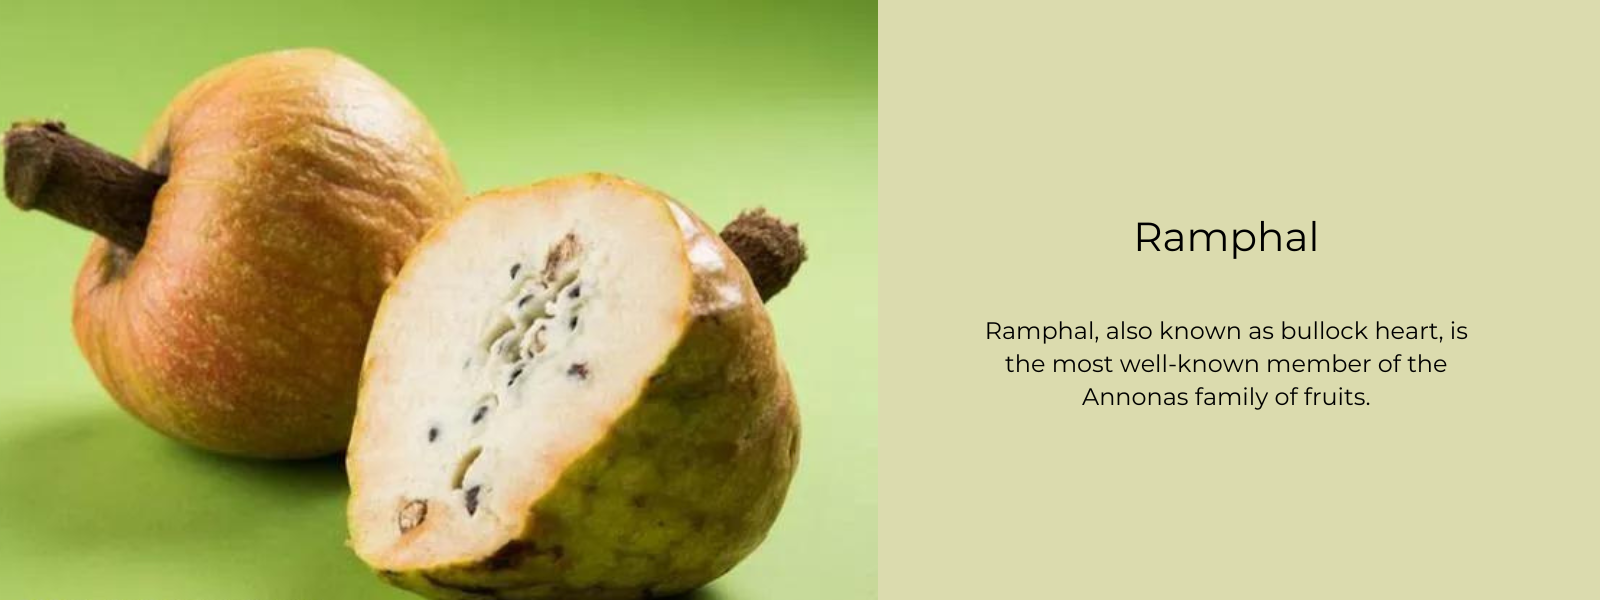 Ramphal - Health Benefits, Uses and Important Facts